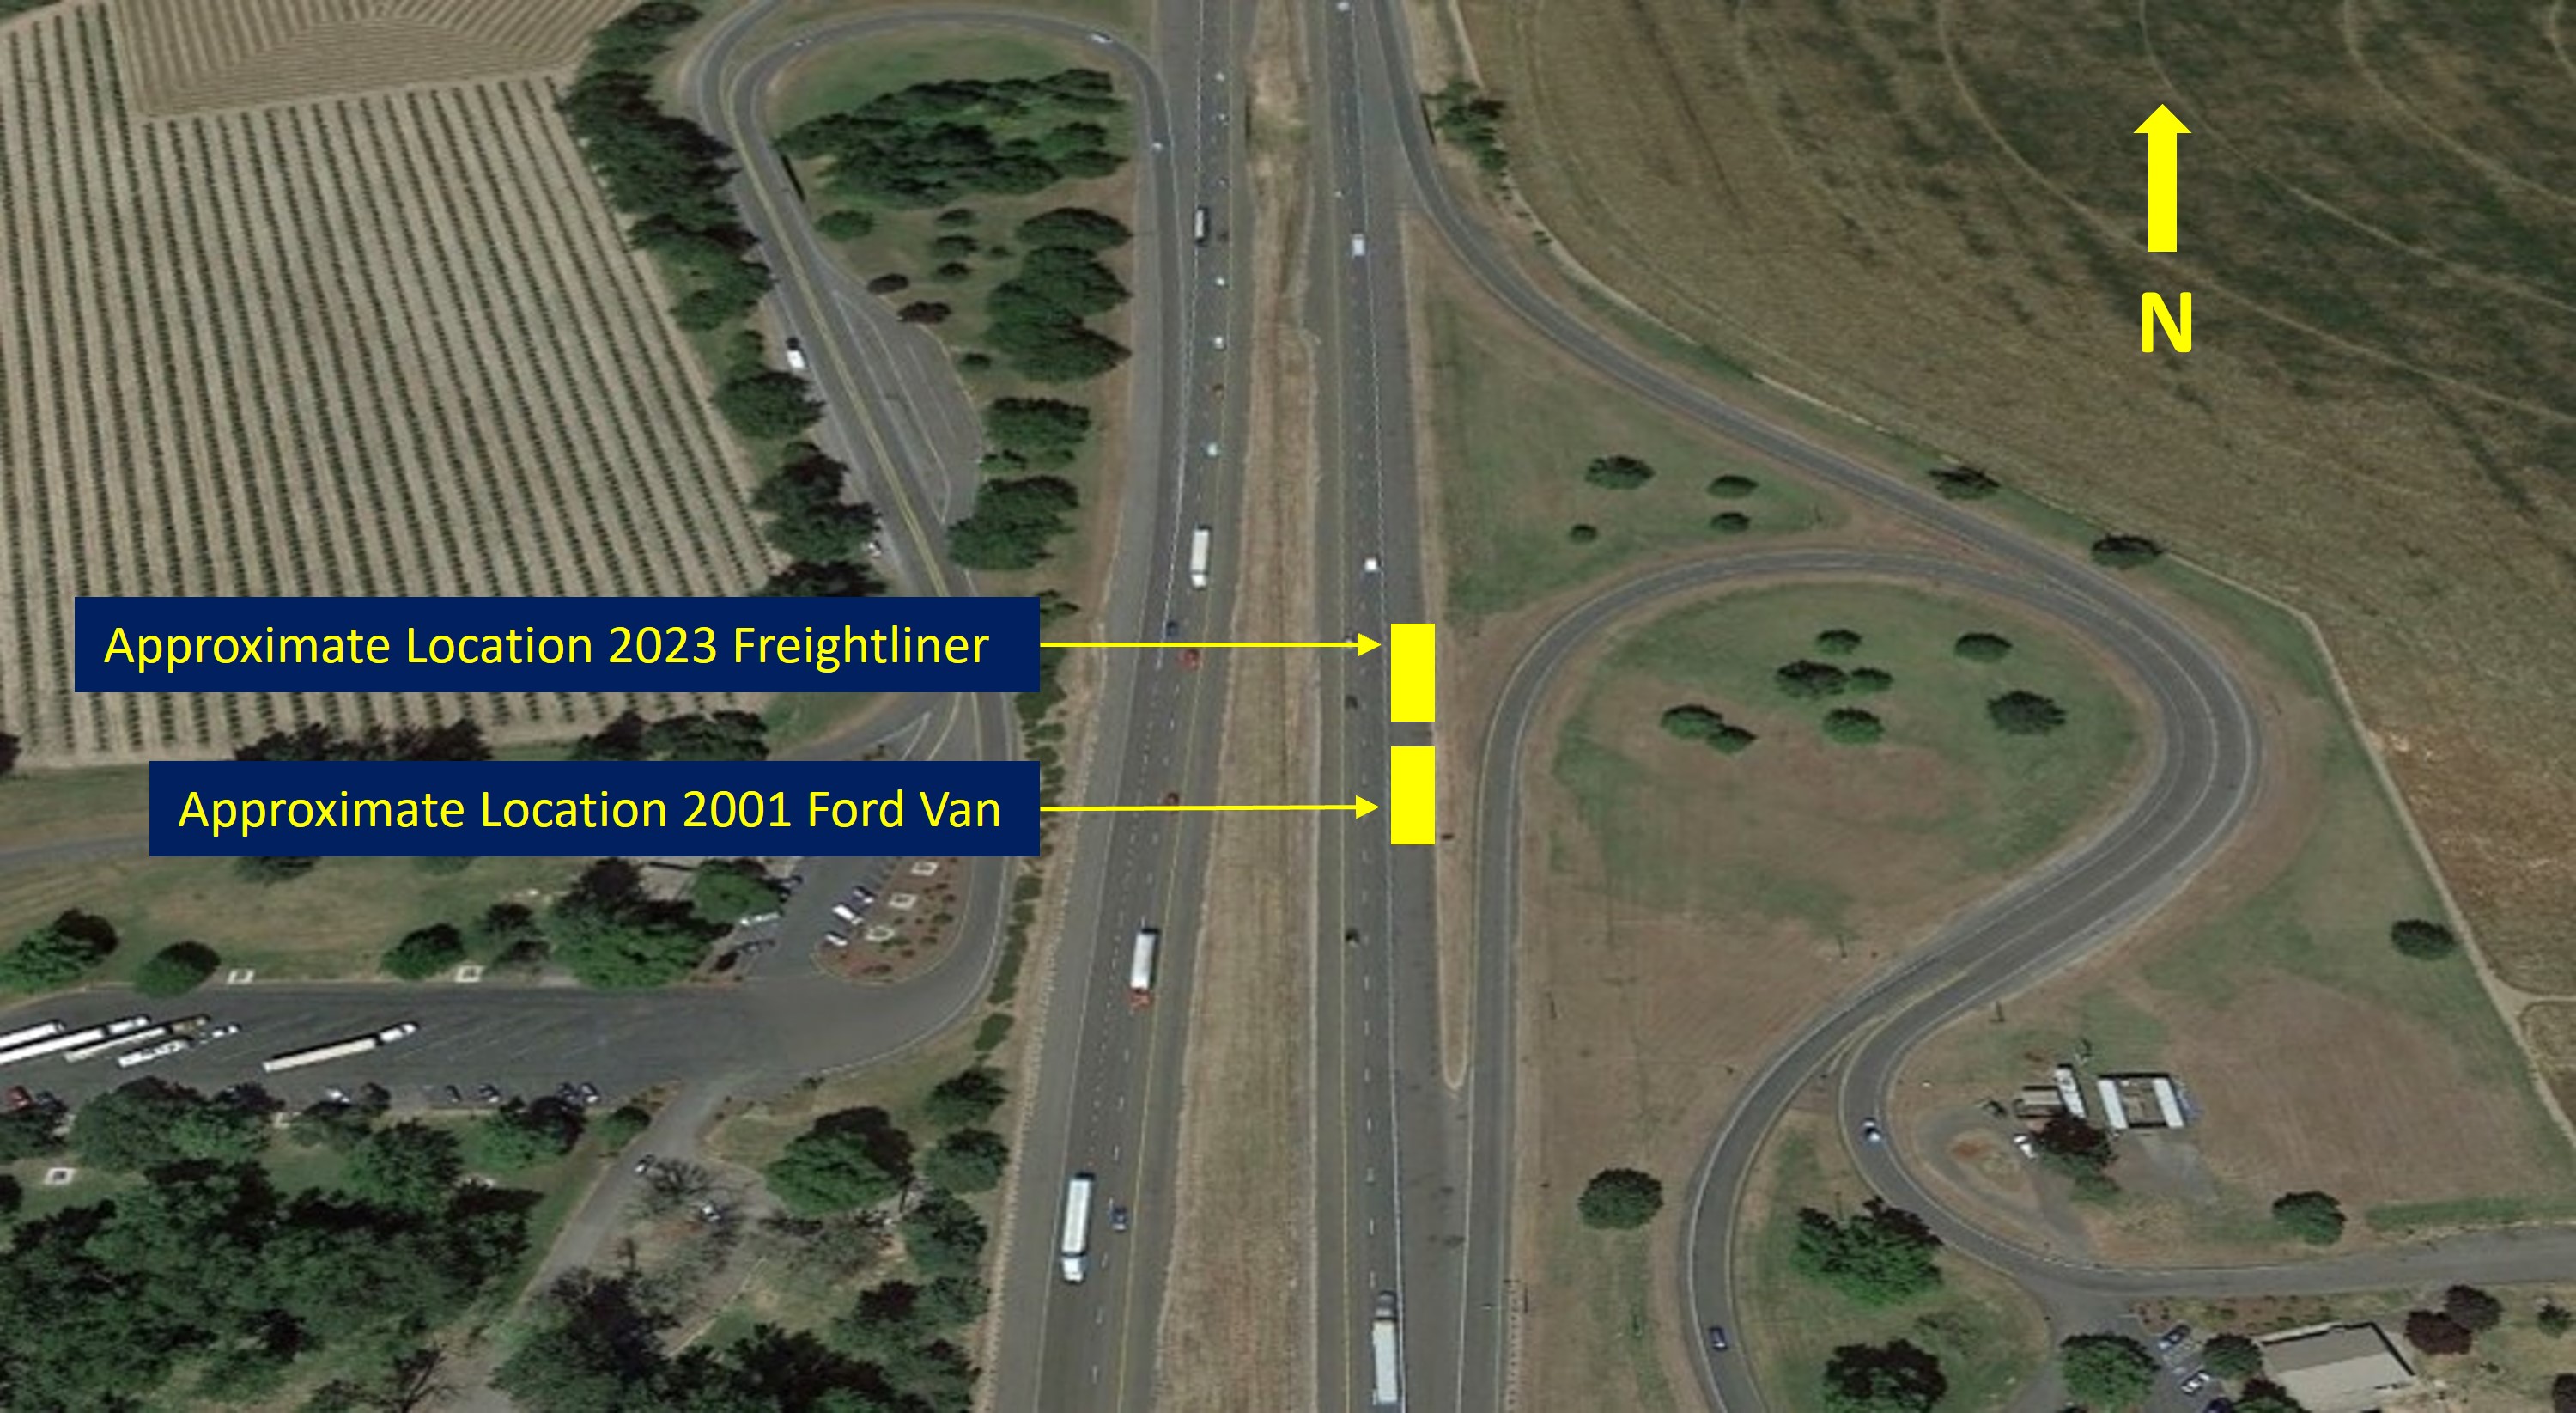 Aerial view of I-5 at the North Santiam rest area showing the approximate location of the 2023 Freightliner and the 2001 Ford va